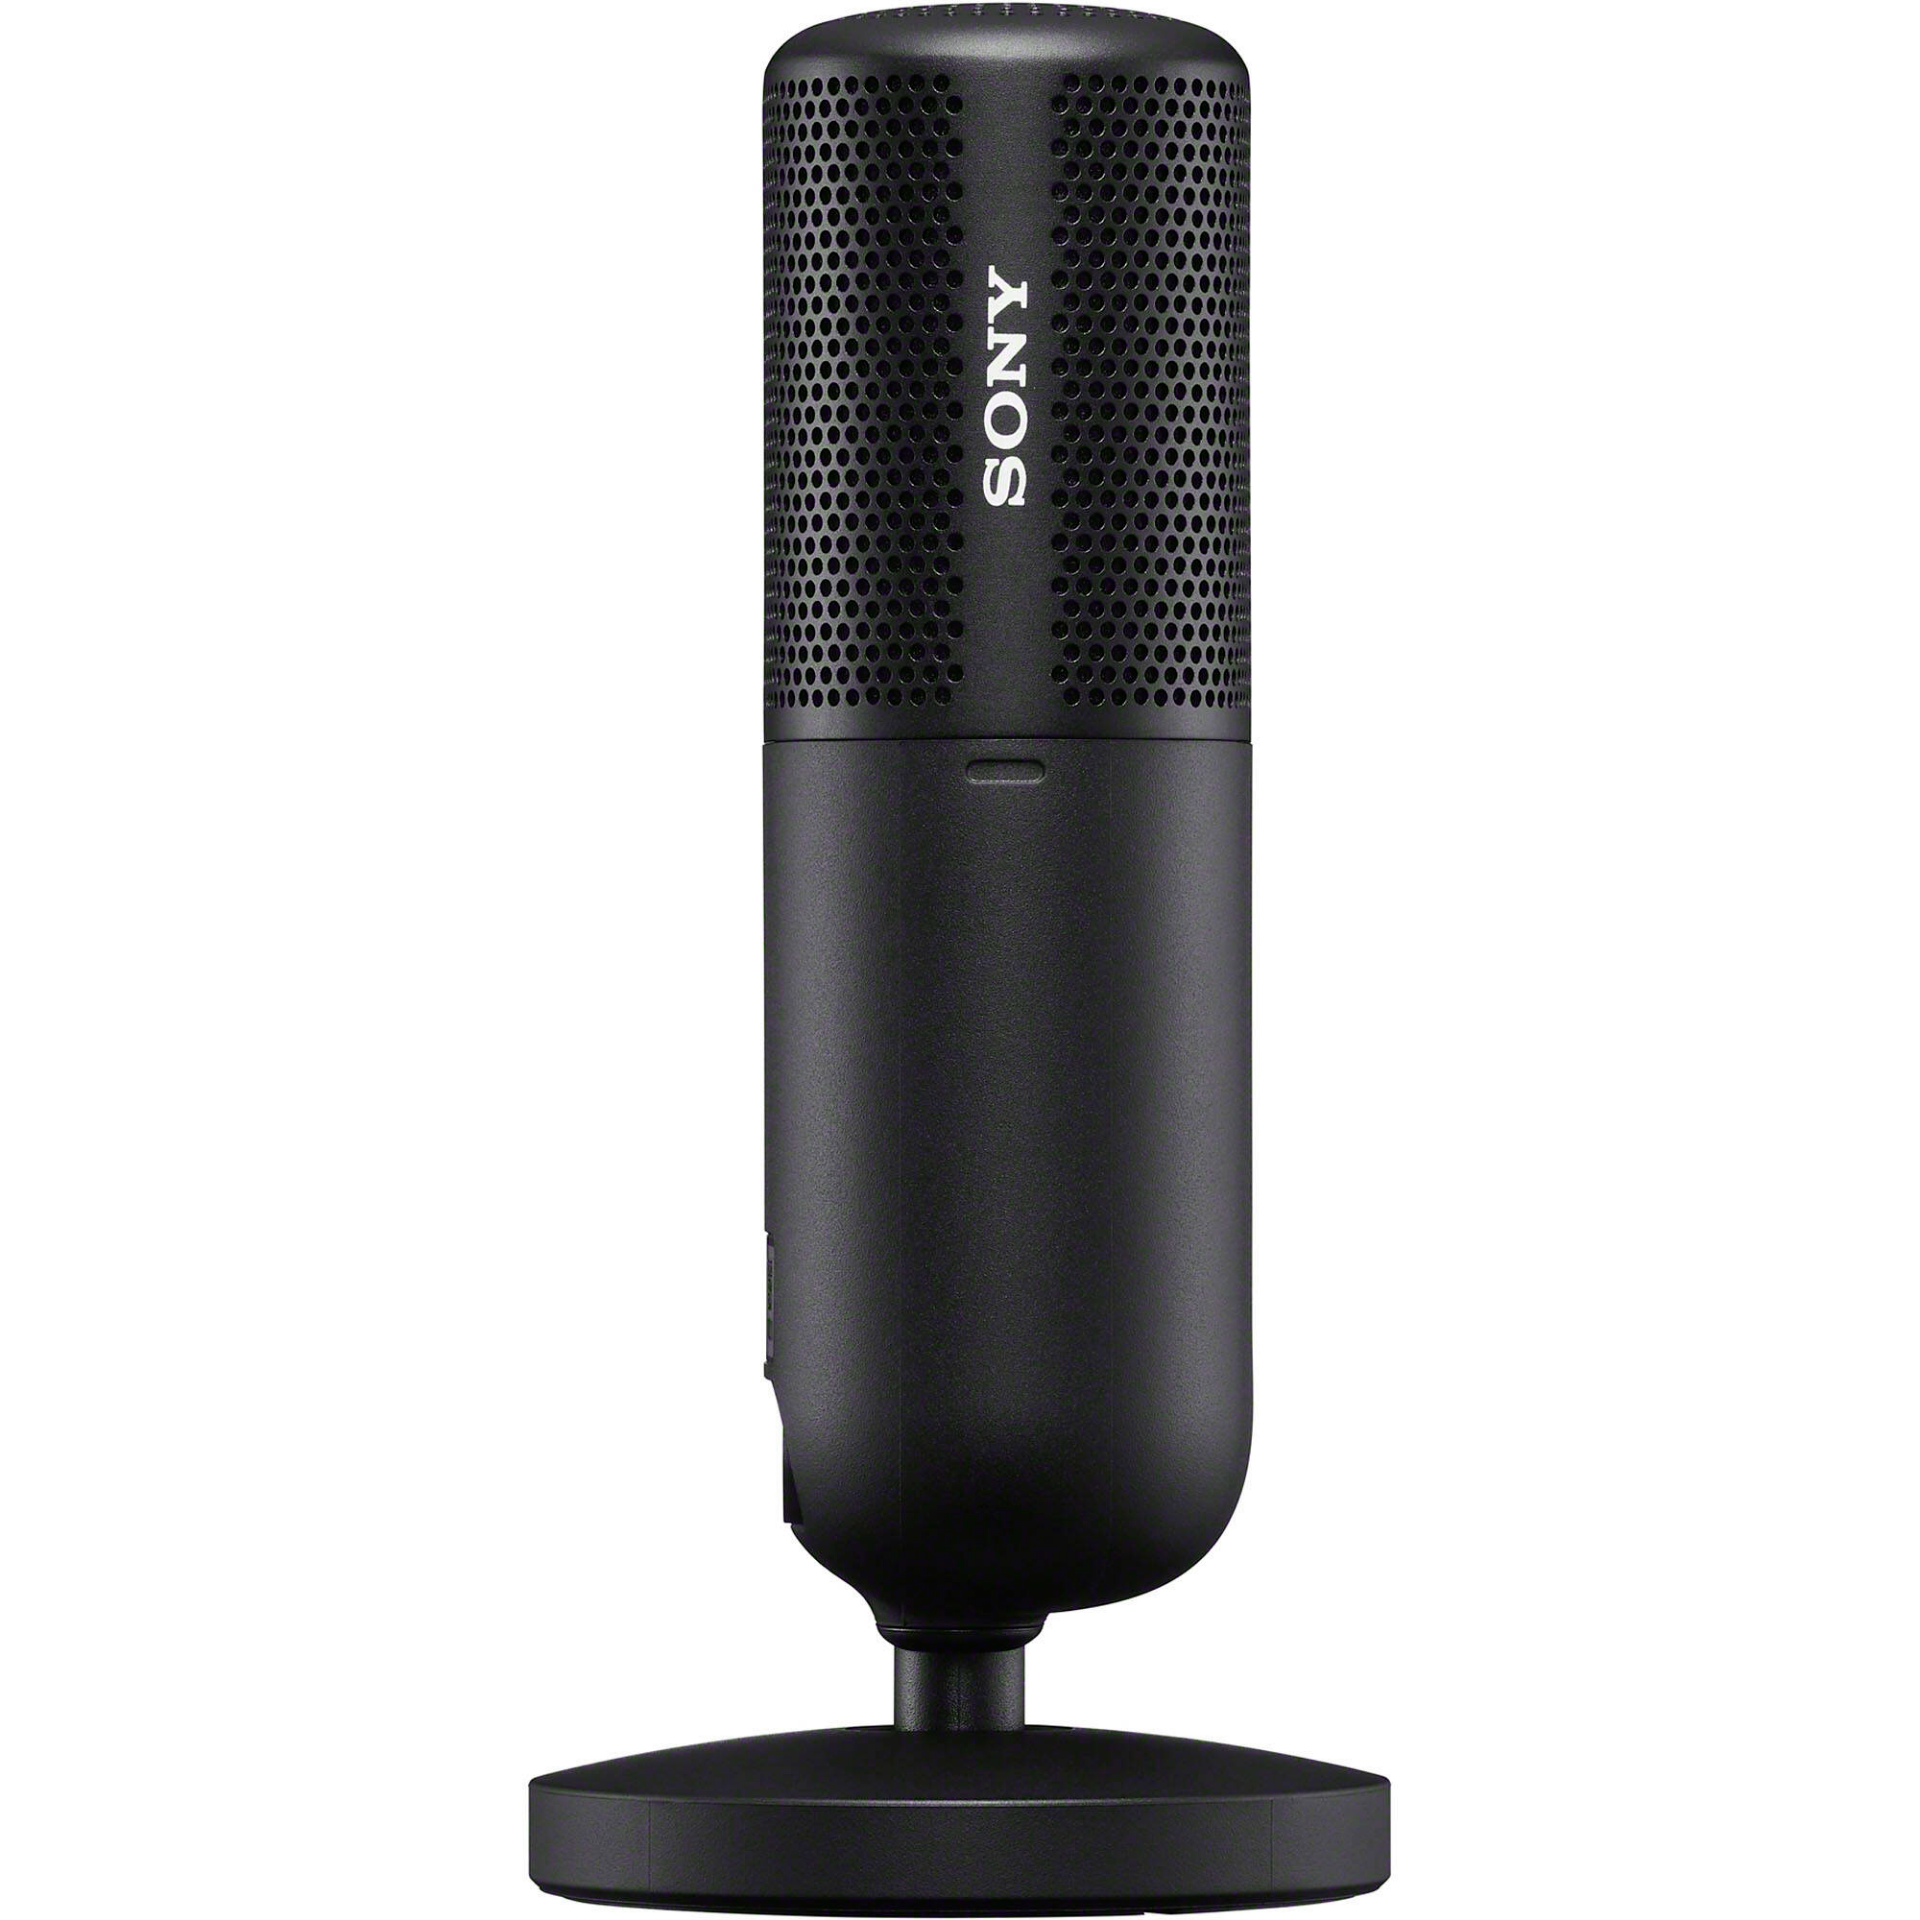 Buy Sony ECM-S1 Wireless Streaming Microphone at Lowest Price in